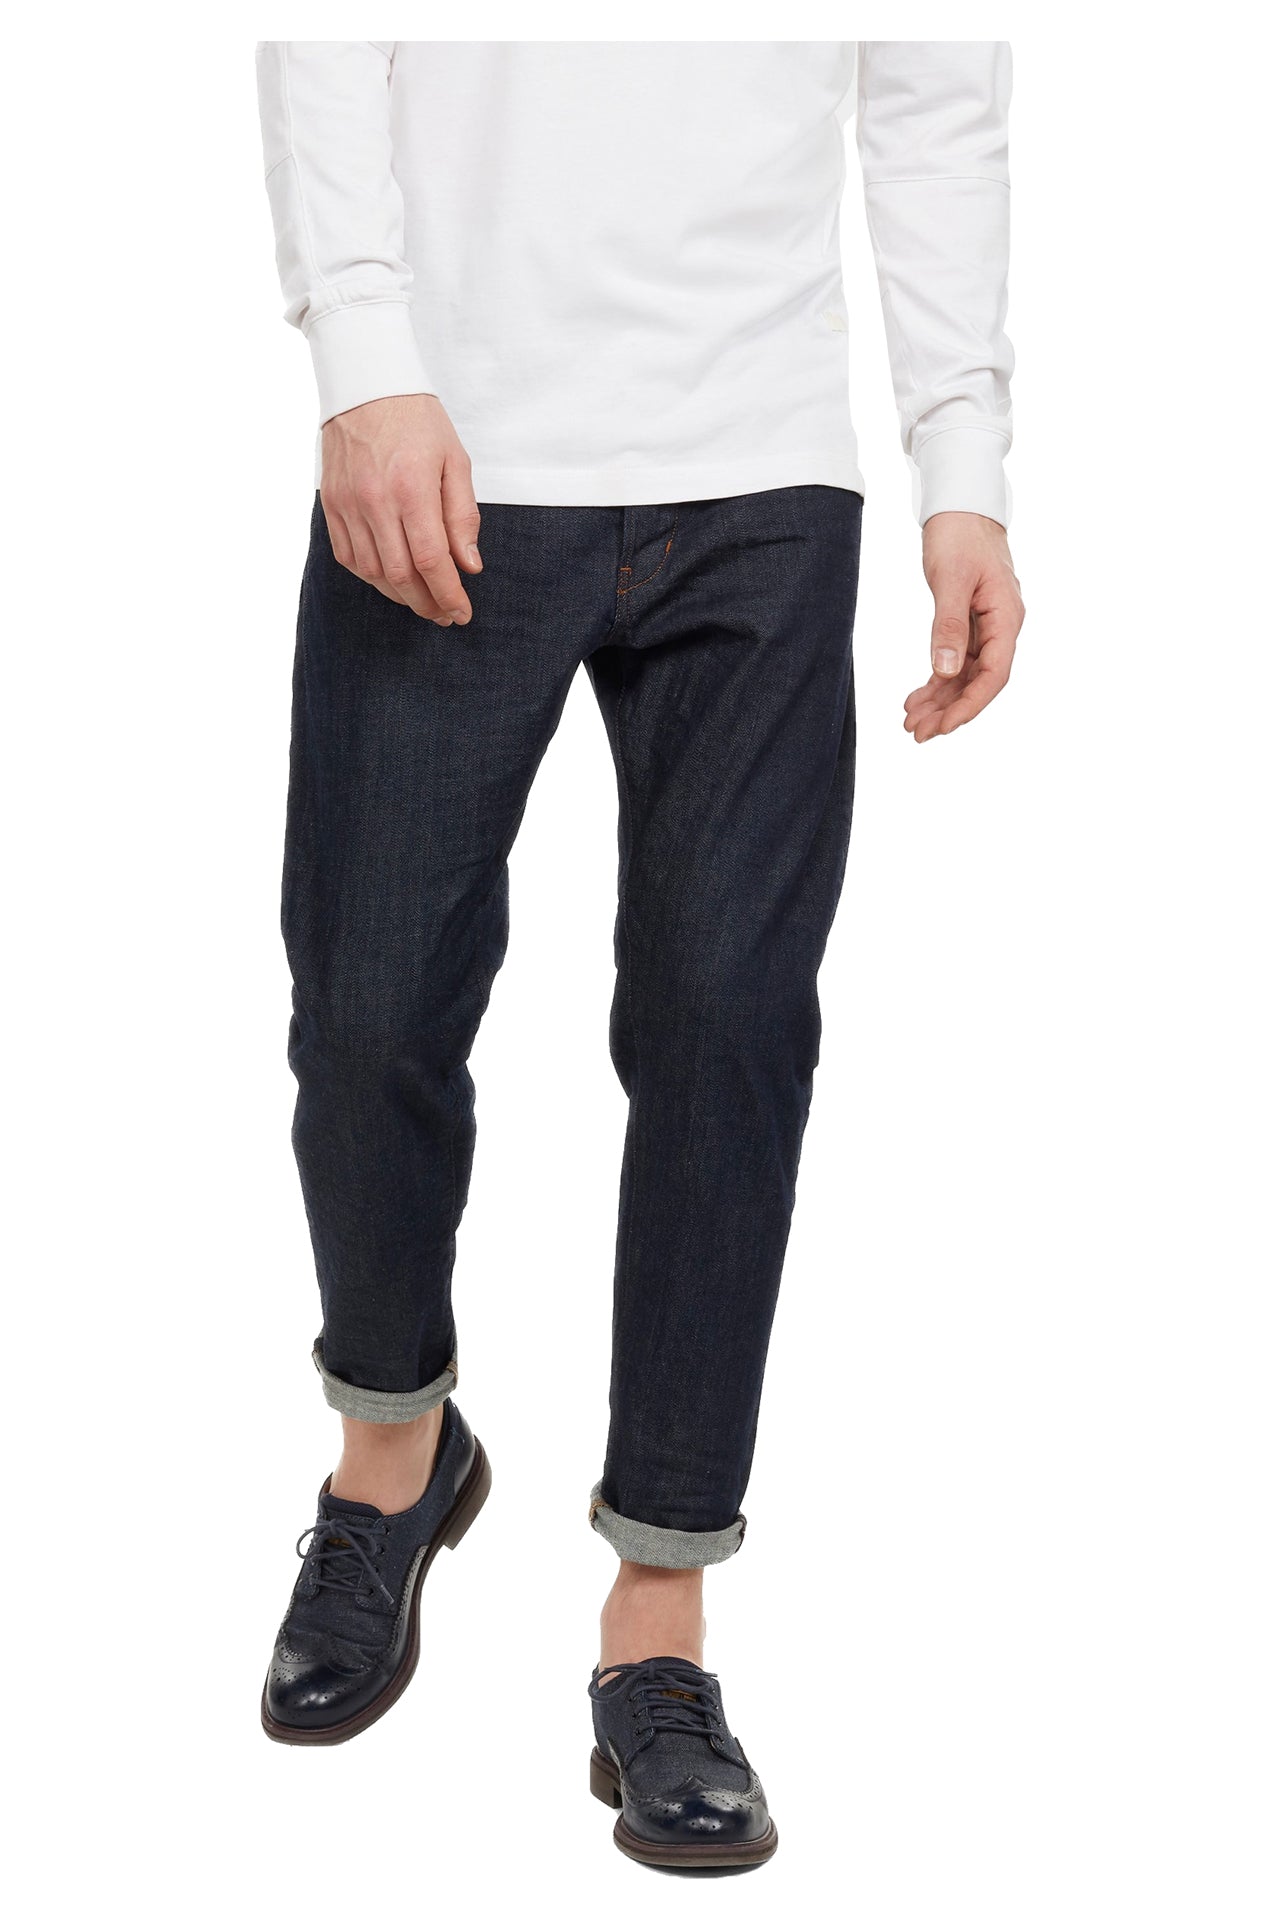 G-Star Loic Relaxed Tapered Jean 3D Raw Denim